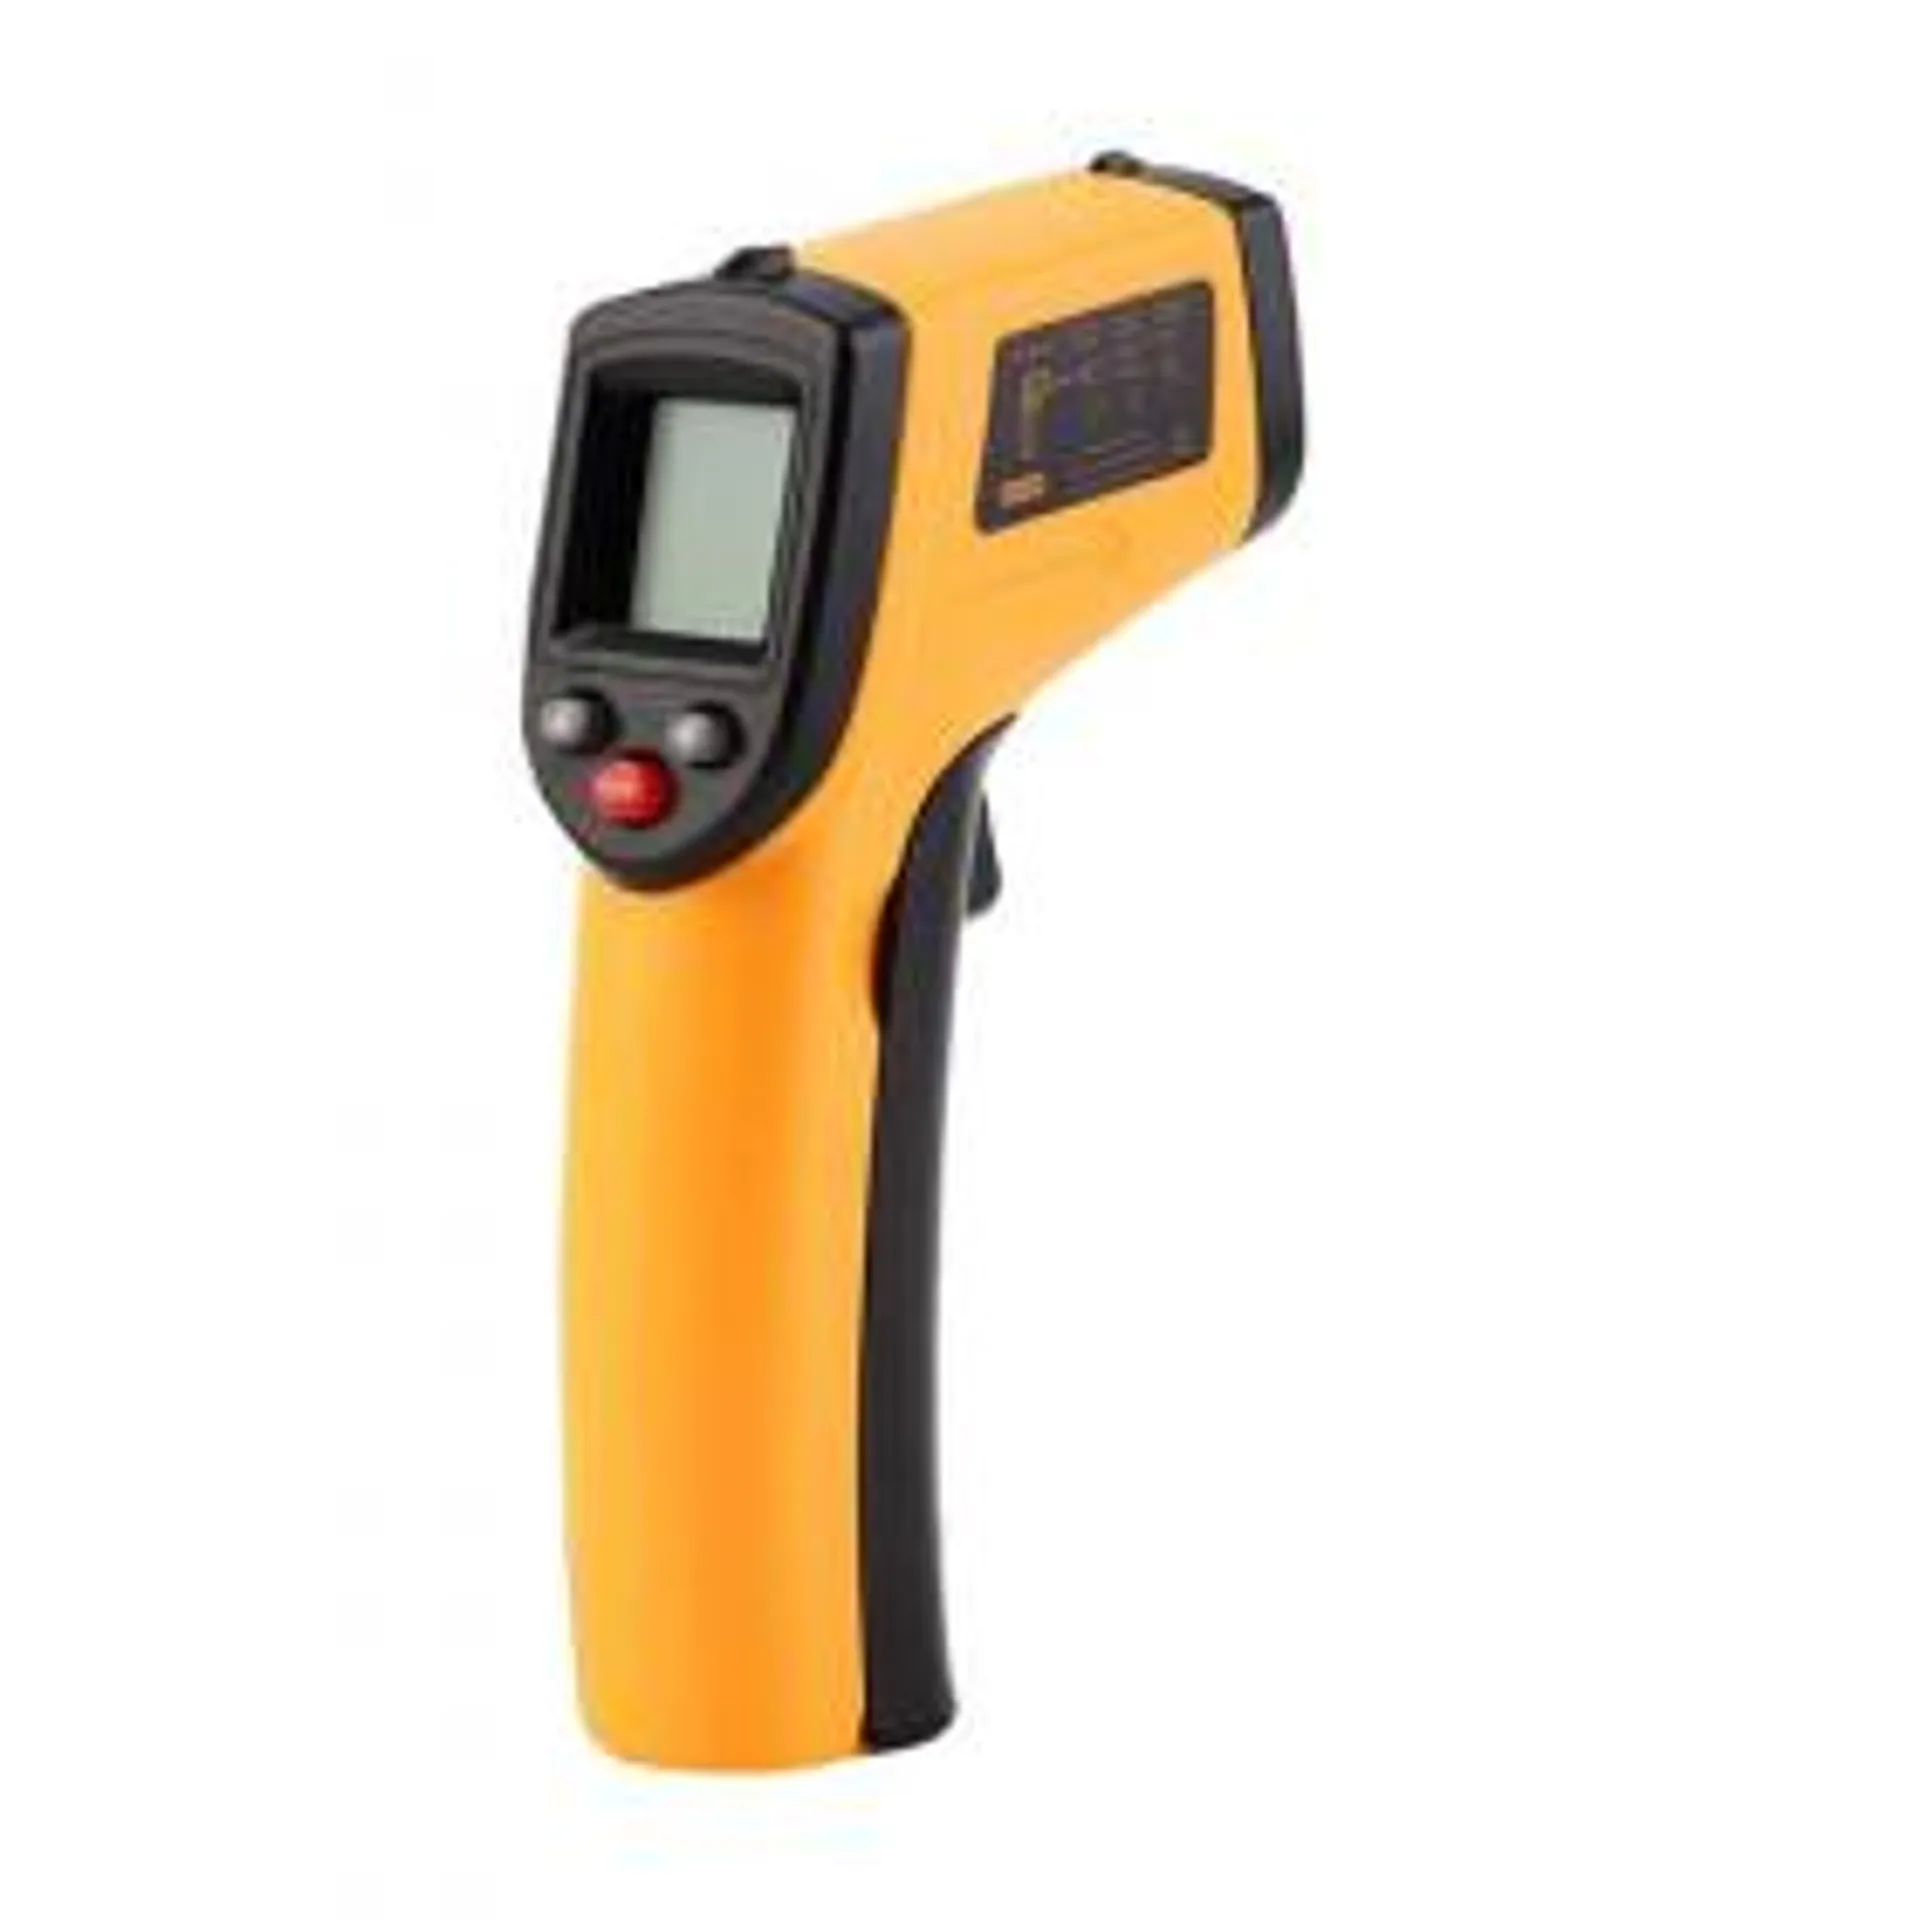 LCD Infrared Digital Thermometer...